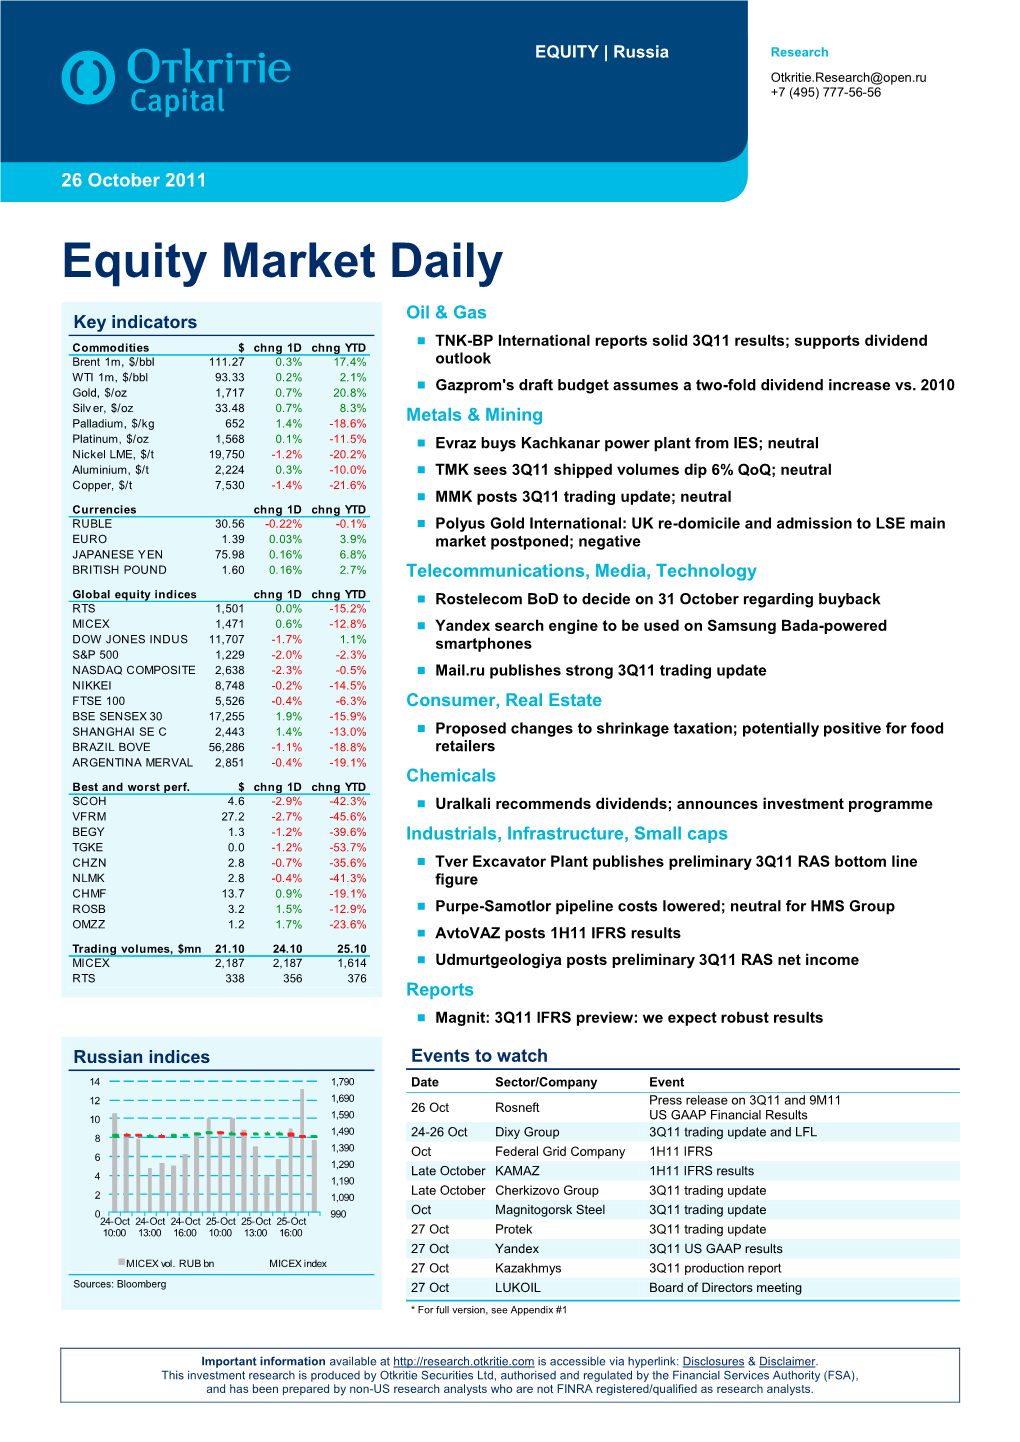 Equity Market Daily